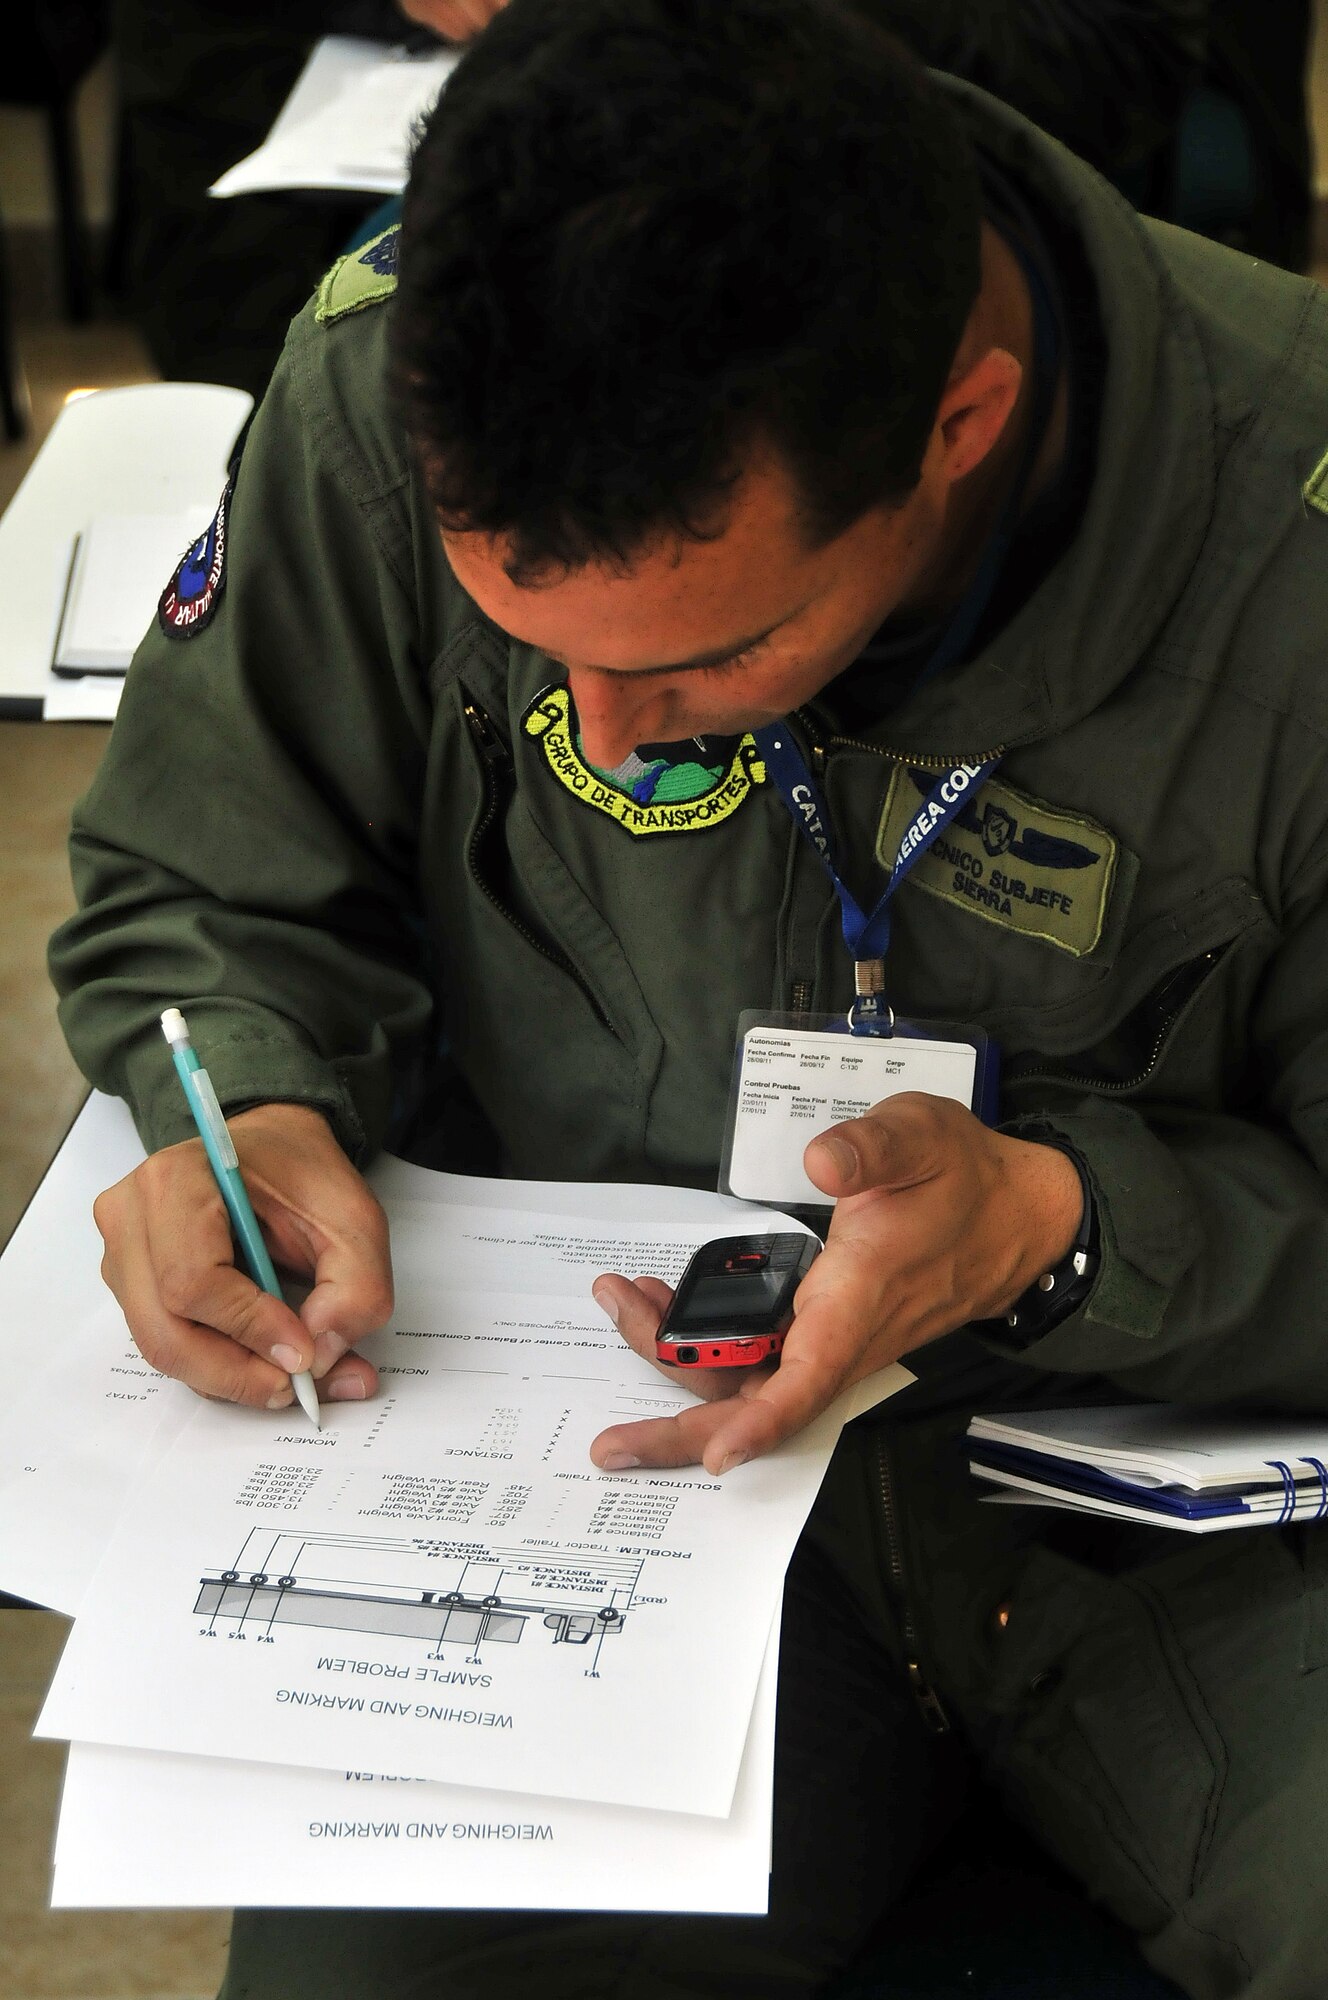 Técnico Subjefe Hector Sierra, Colombian air force member, completes the center of balance handout during a seminar June 6 at Commando Aéreo de Transporte Militar, Bogota, Colombia.  (U.S. Air Force photo by Tech. Sgt. Lesley Waters)